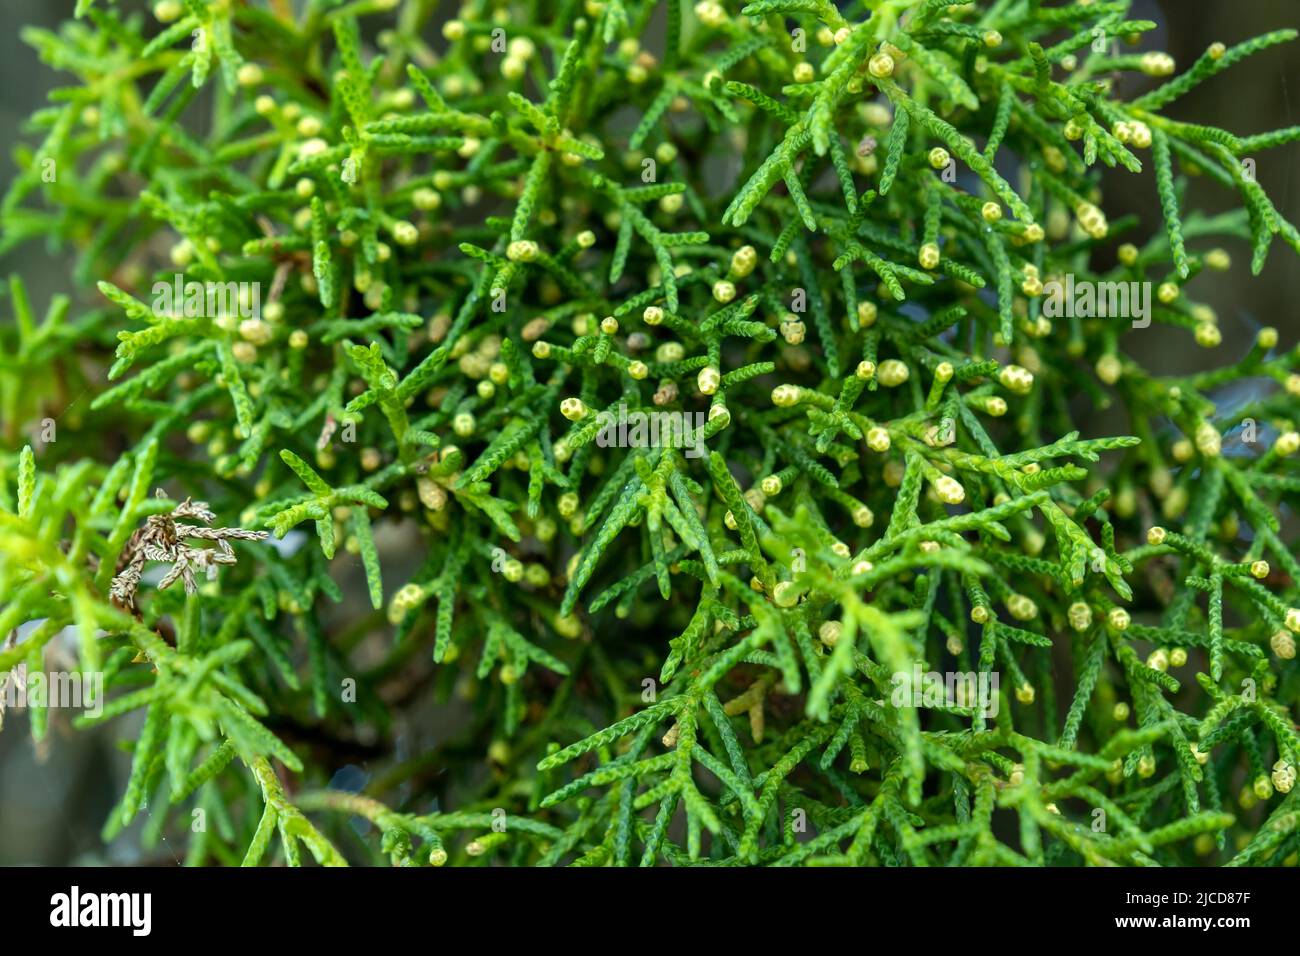 Mediterranean cypress (Cupressus sempervirens) evergreen conifer tree green leaves and shoots Stock Photo